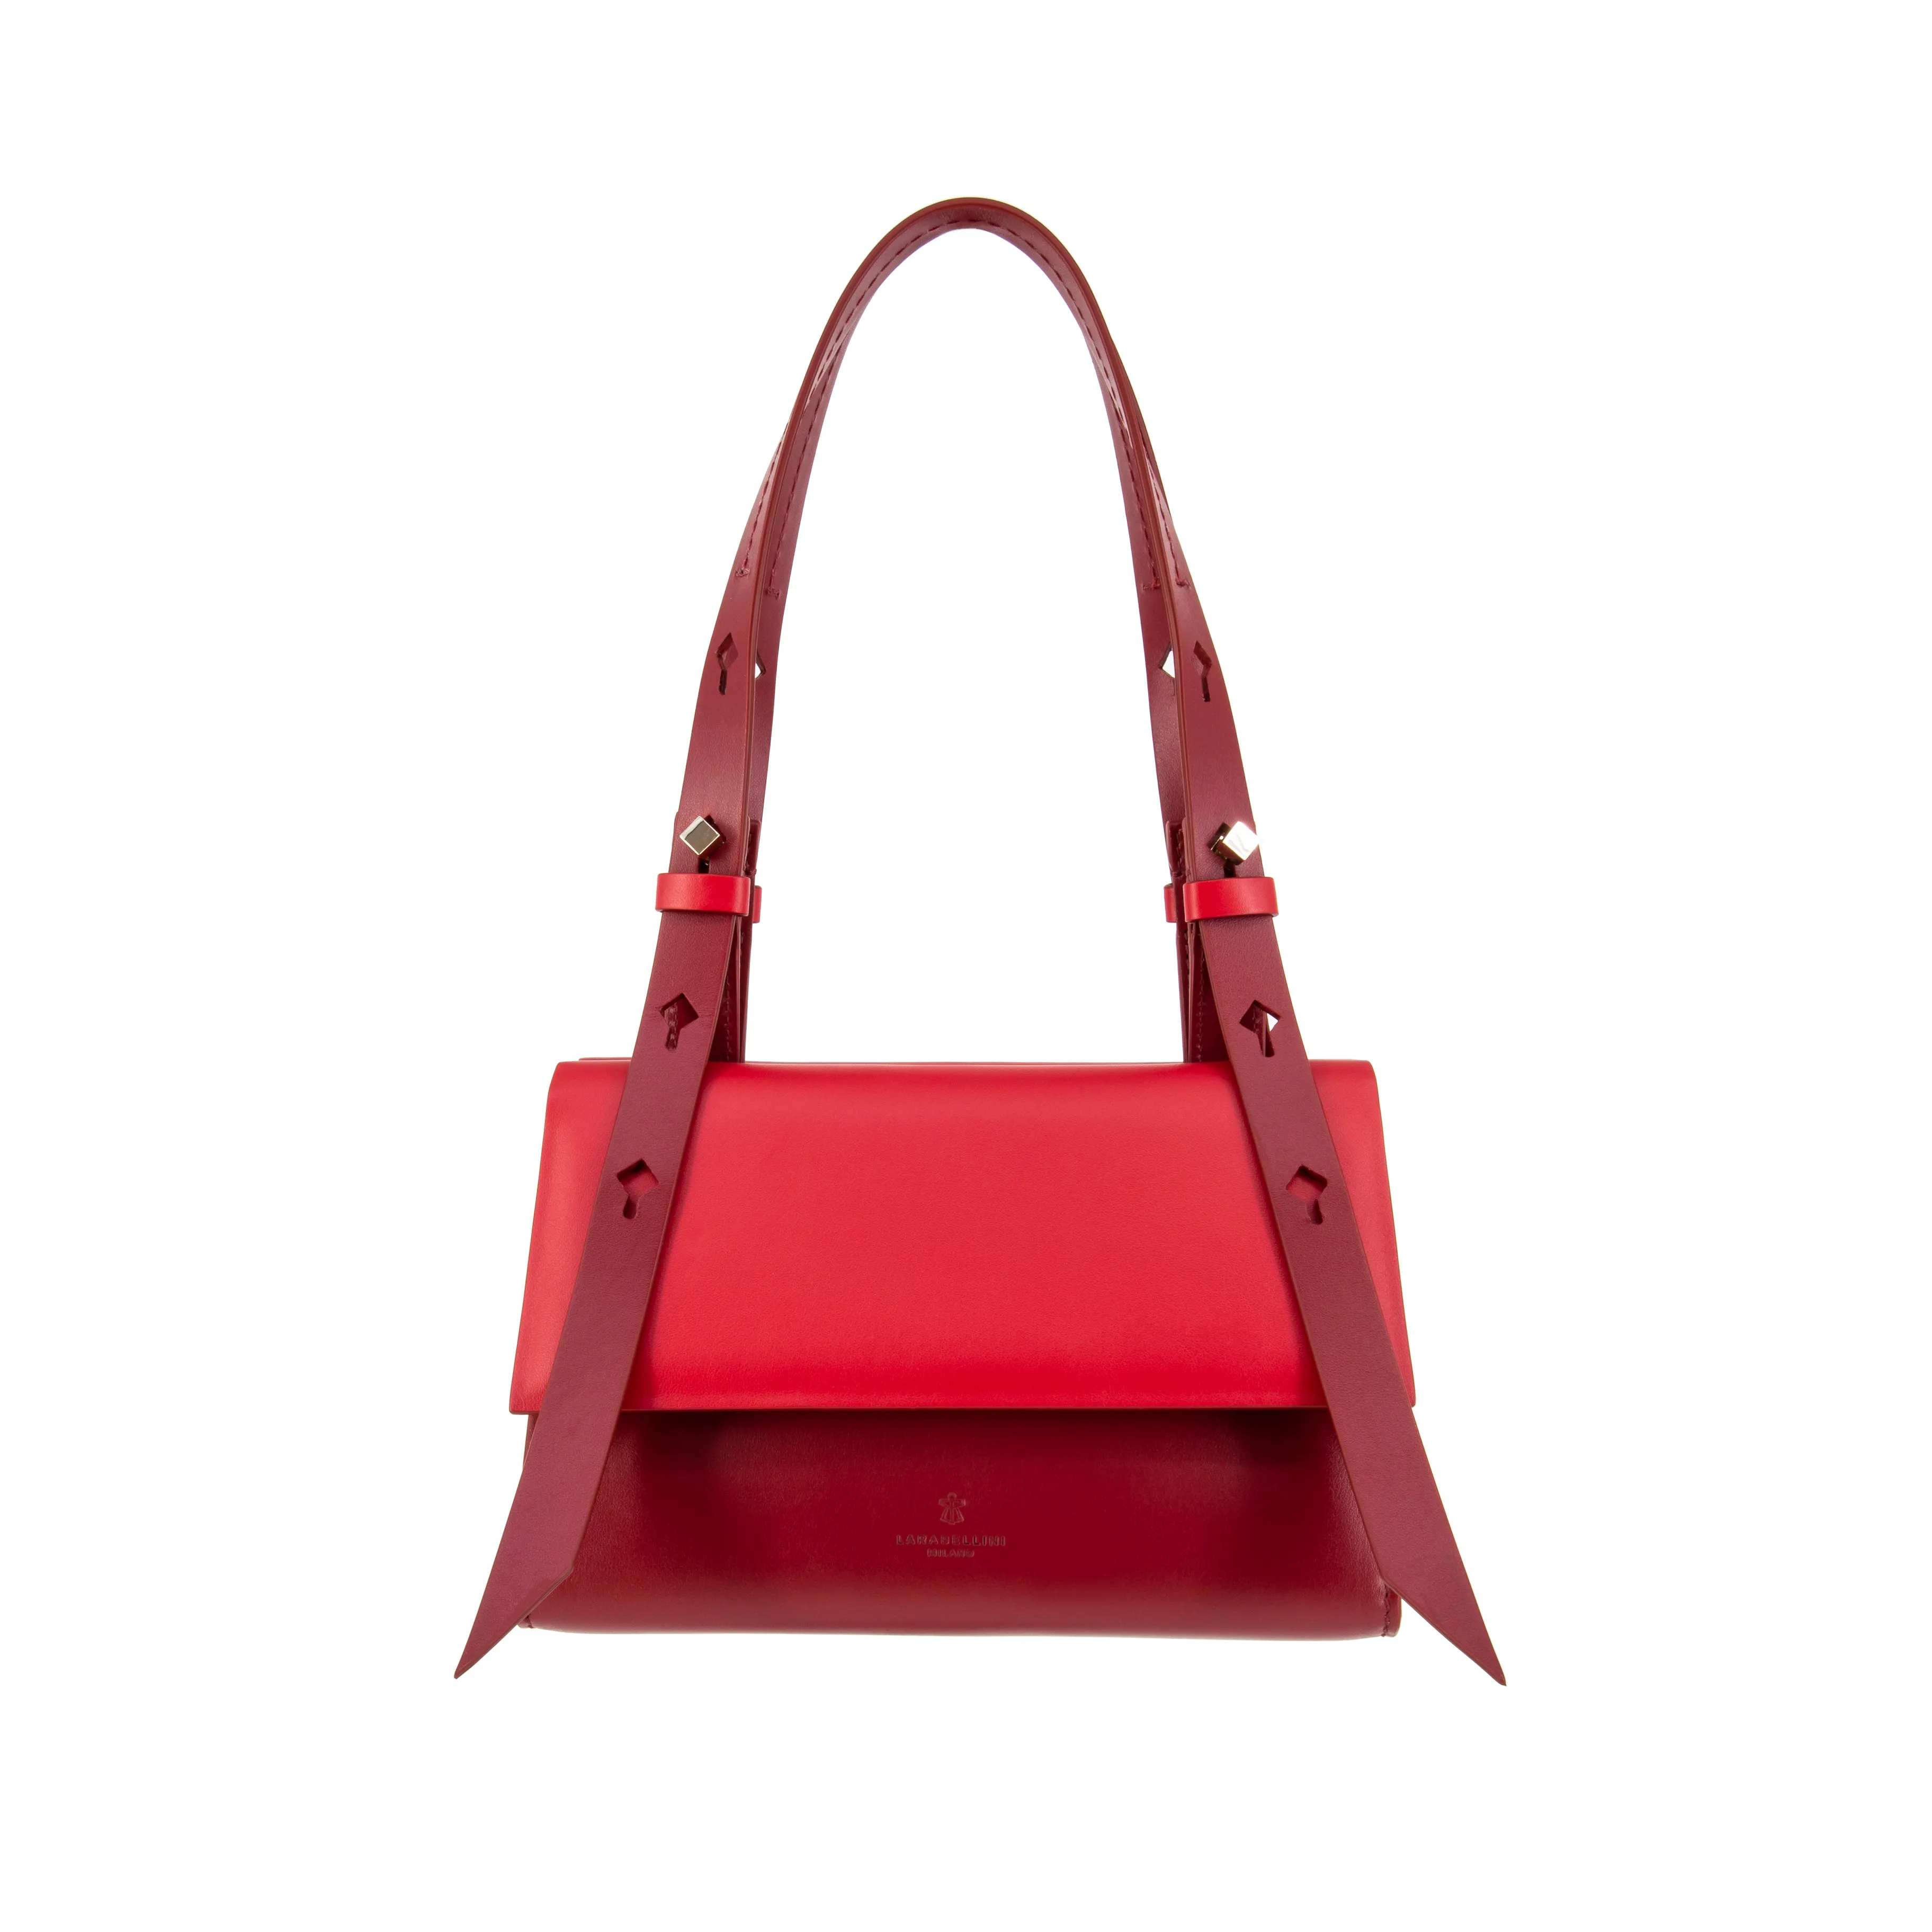 Jo Mini Red High quality Italian handmade handbags with fine leather and metal and light gold plated finishes